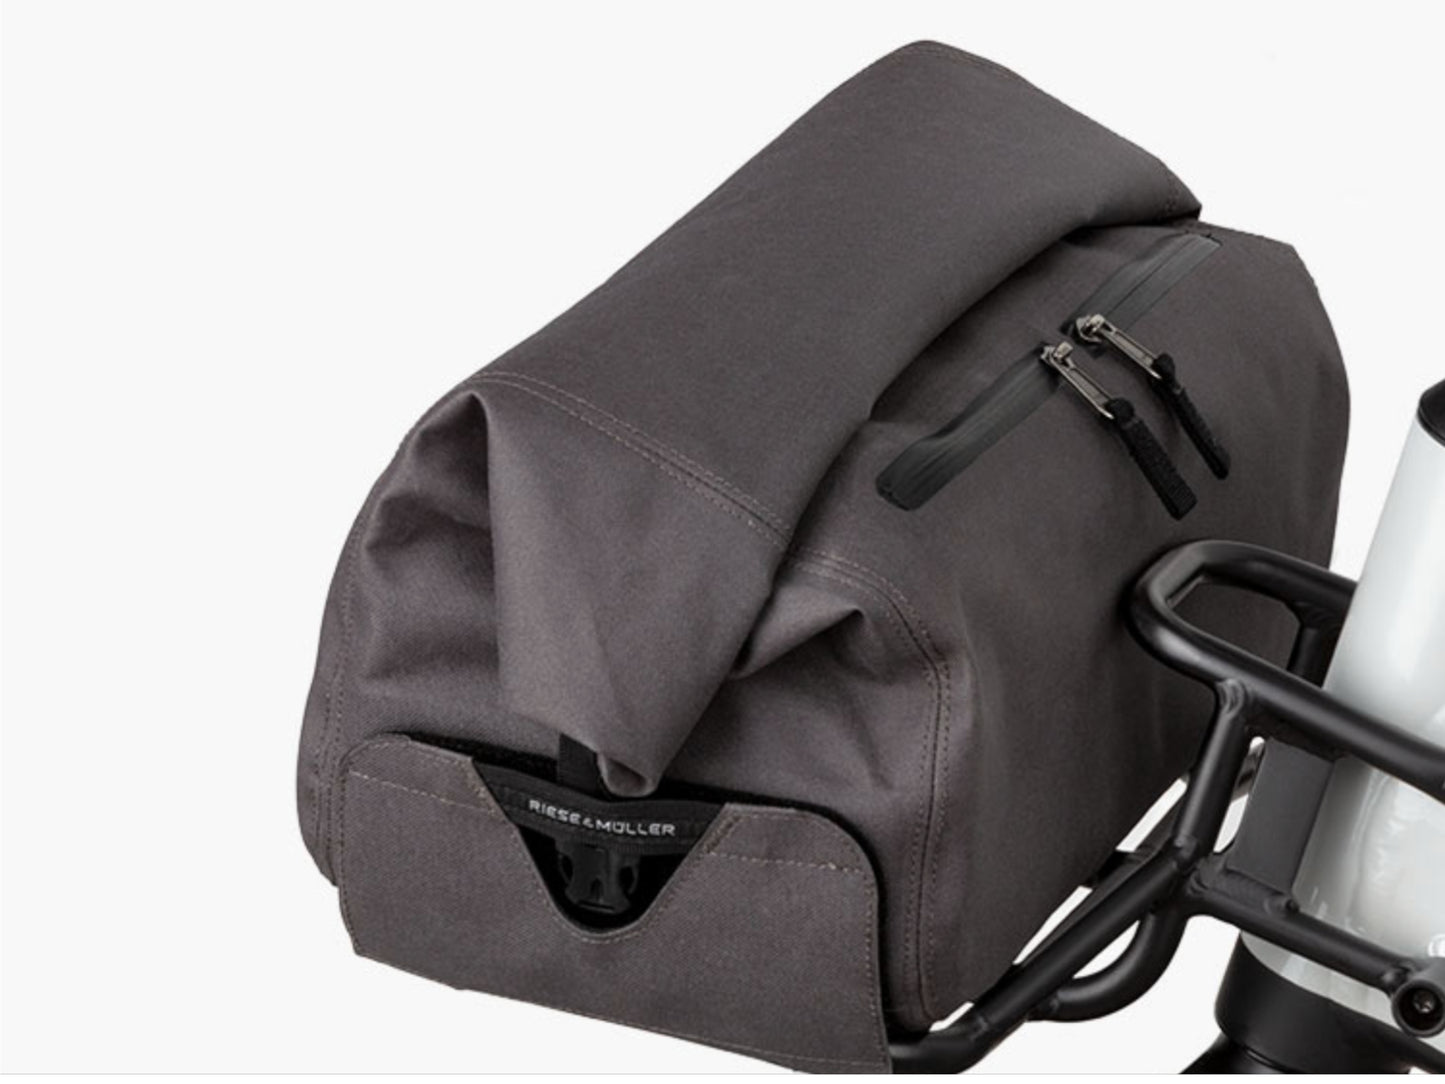 Riese and Muller Homage GT Touring HS eMTB full suspension close up front carrier bag option